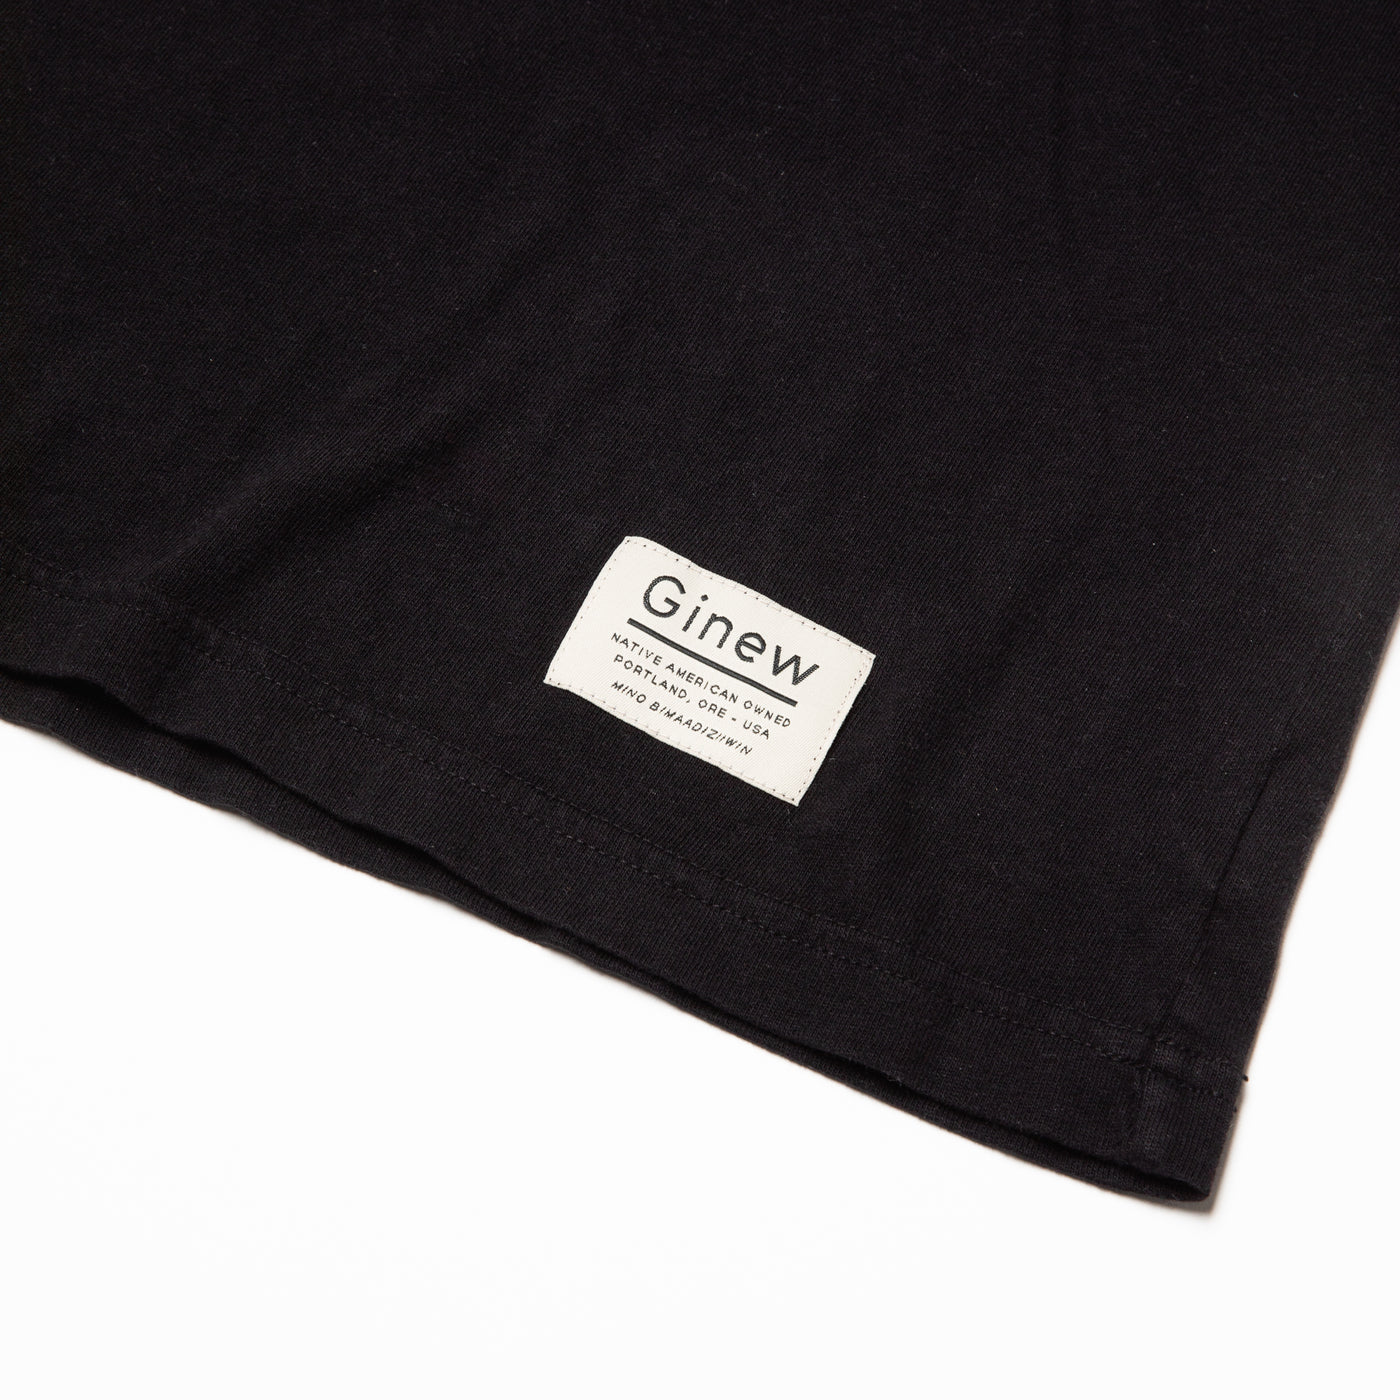 The Crew Tee in Jet Black. The picture shows the white Ginew tag on the bottom left hem which reads "Native American Owned Portland, ORE - USA Mino Bimaadiziiwin". The shirt is laid flat on a white background.